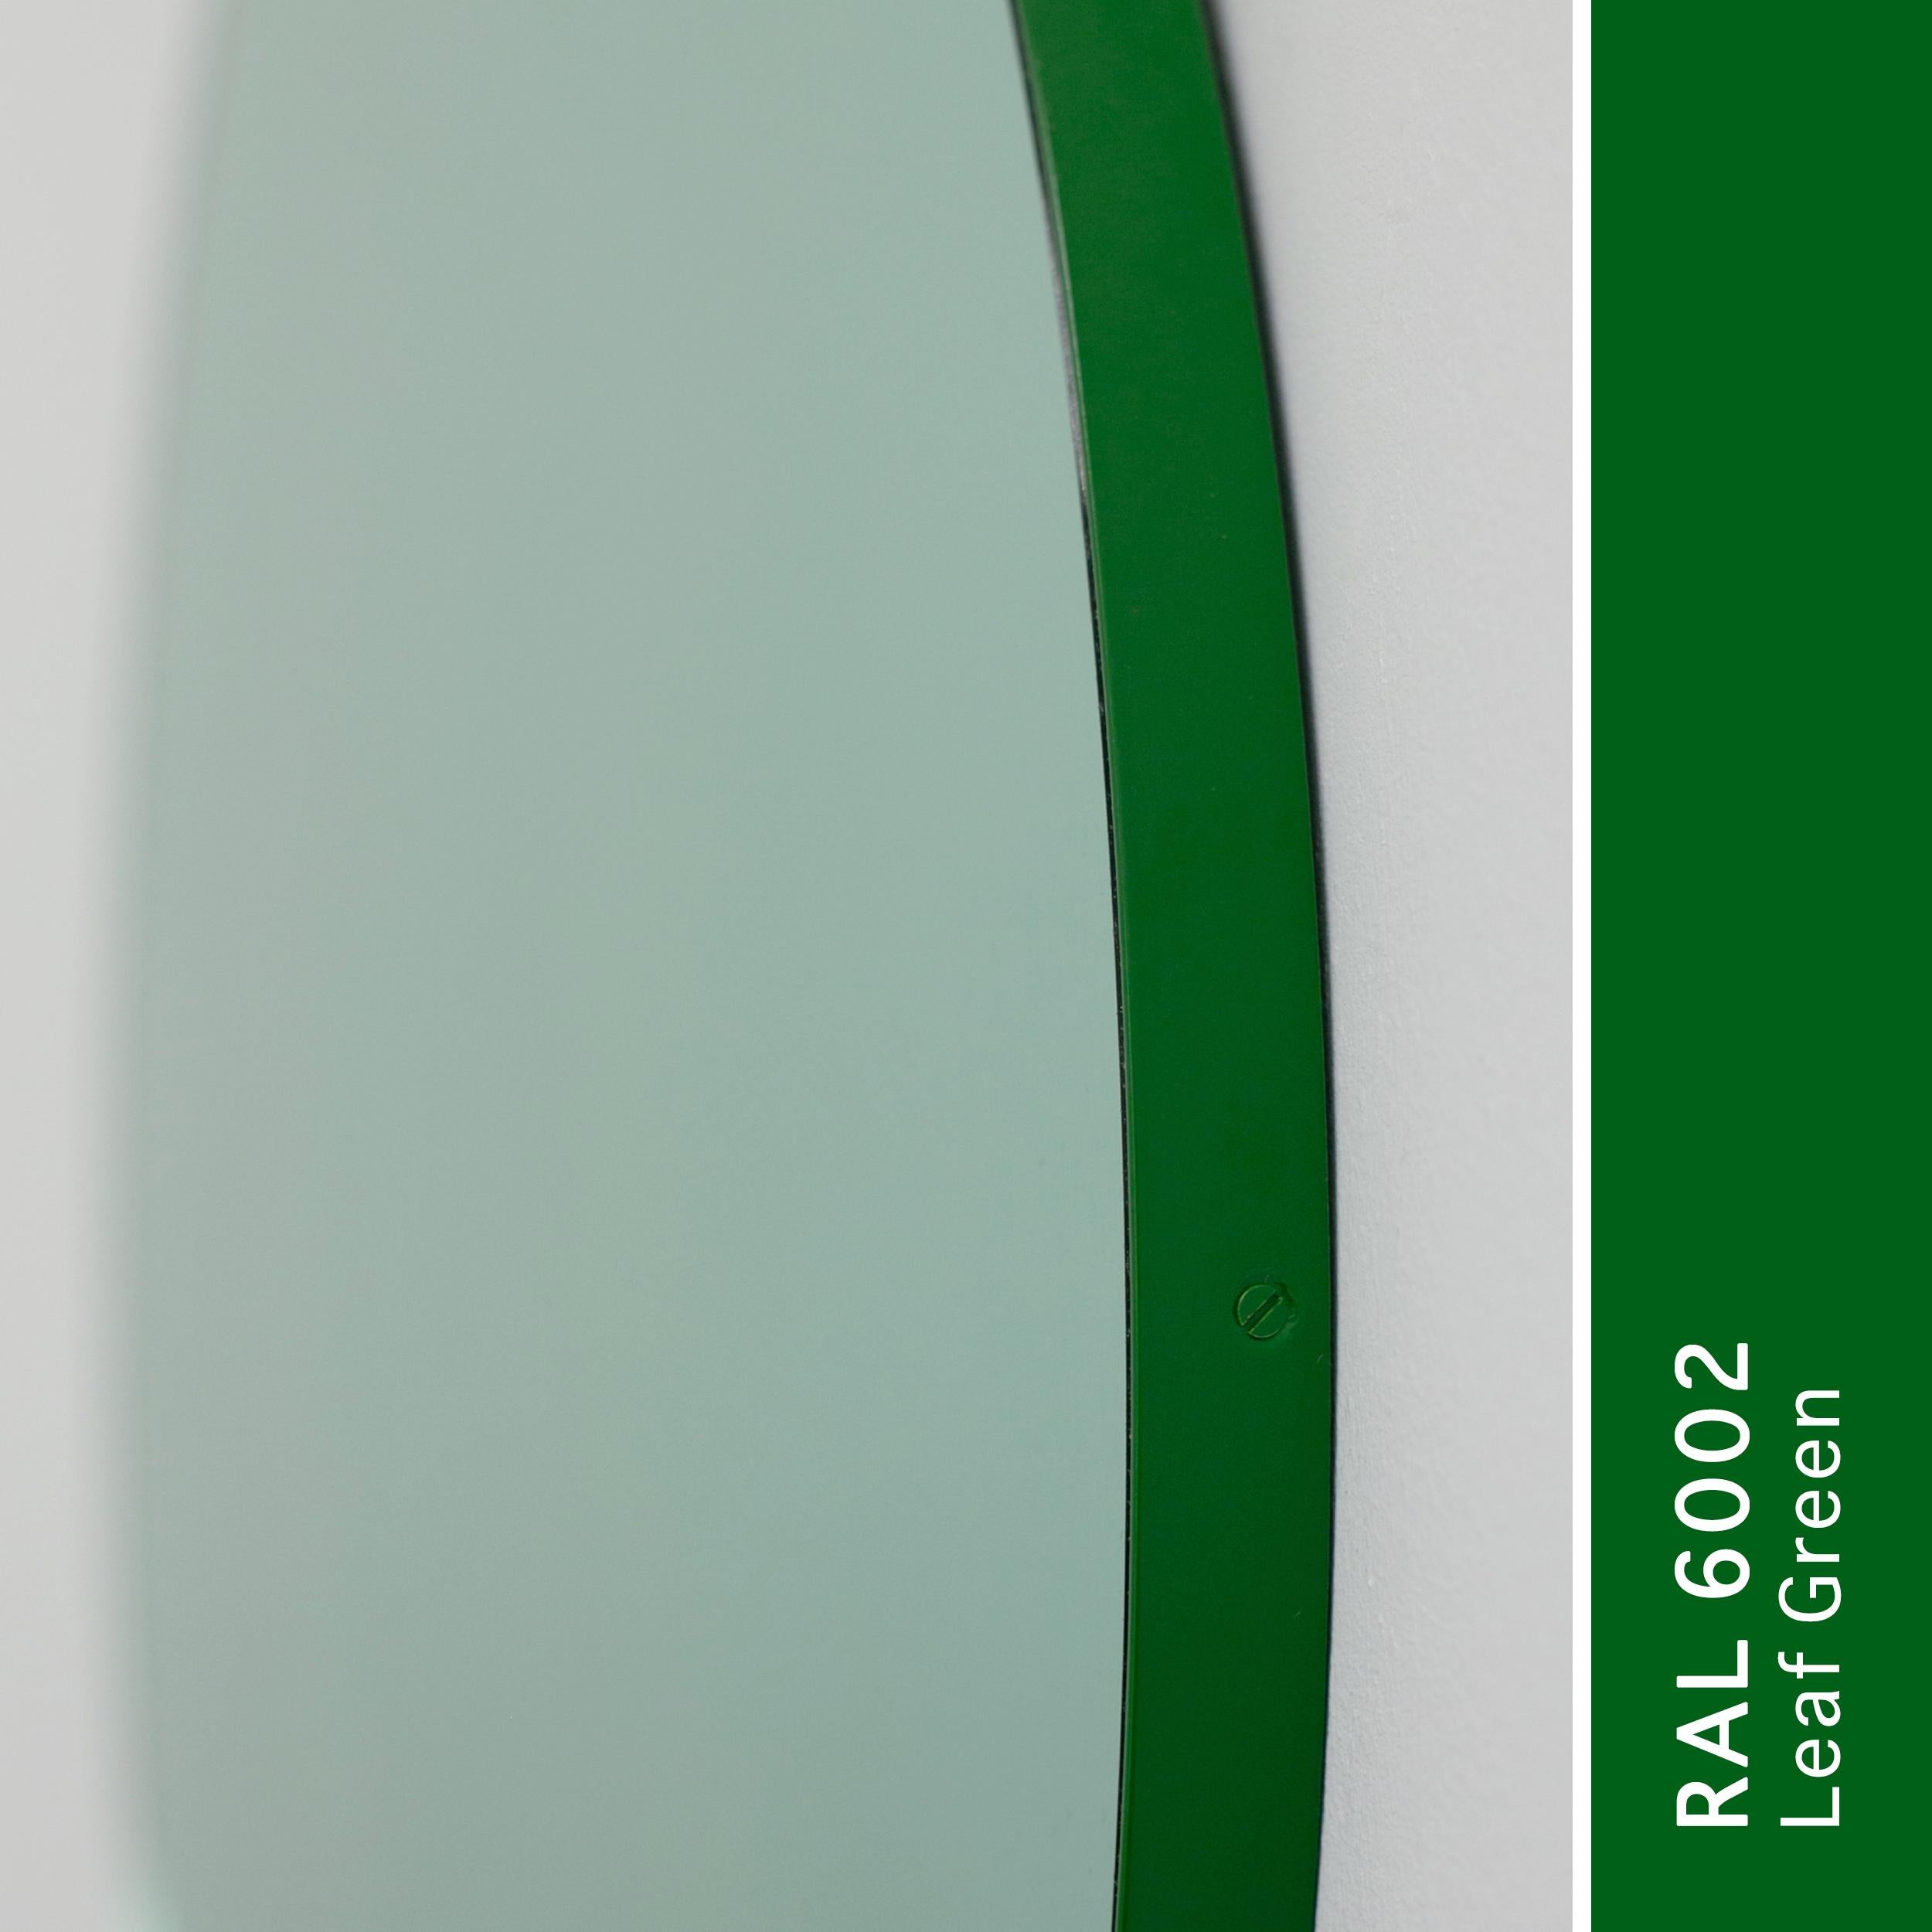 Orbis™ Green Tinted Modern Round Mirror with Green Frame - Large 4